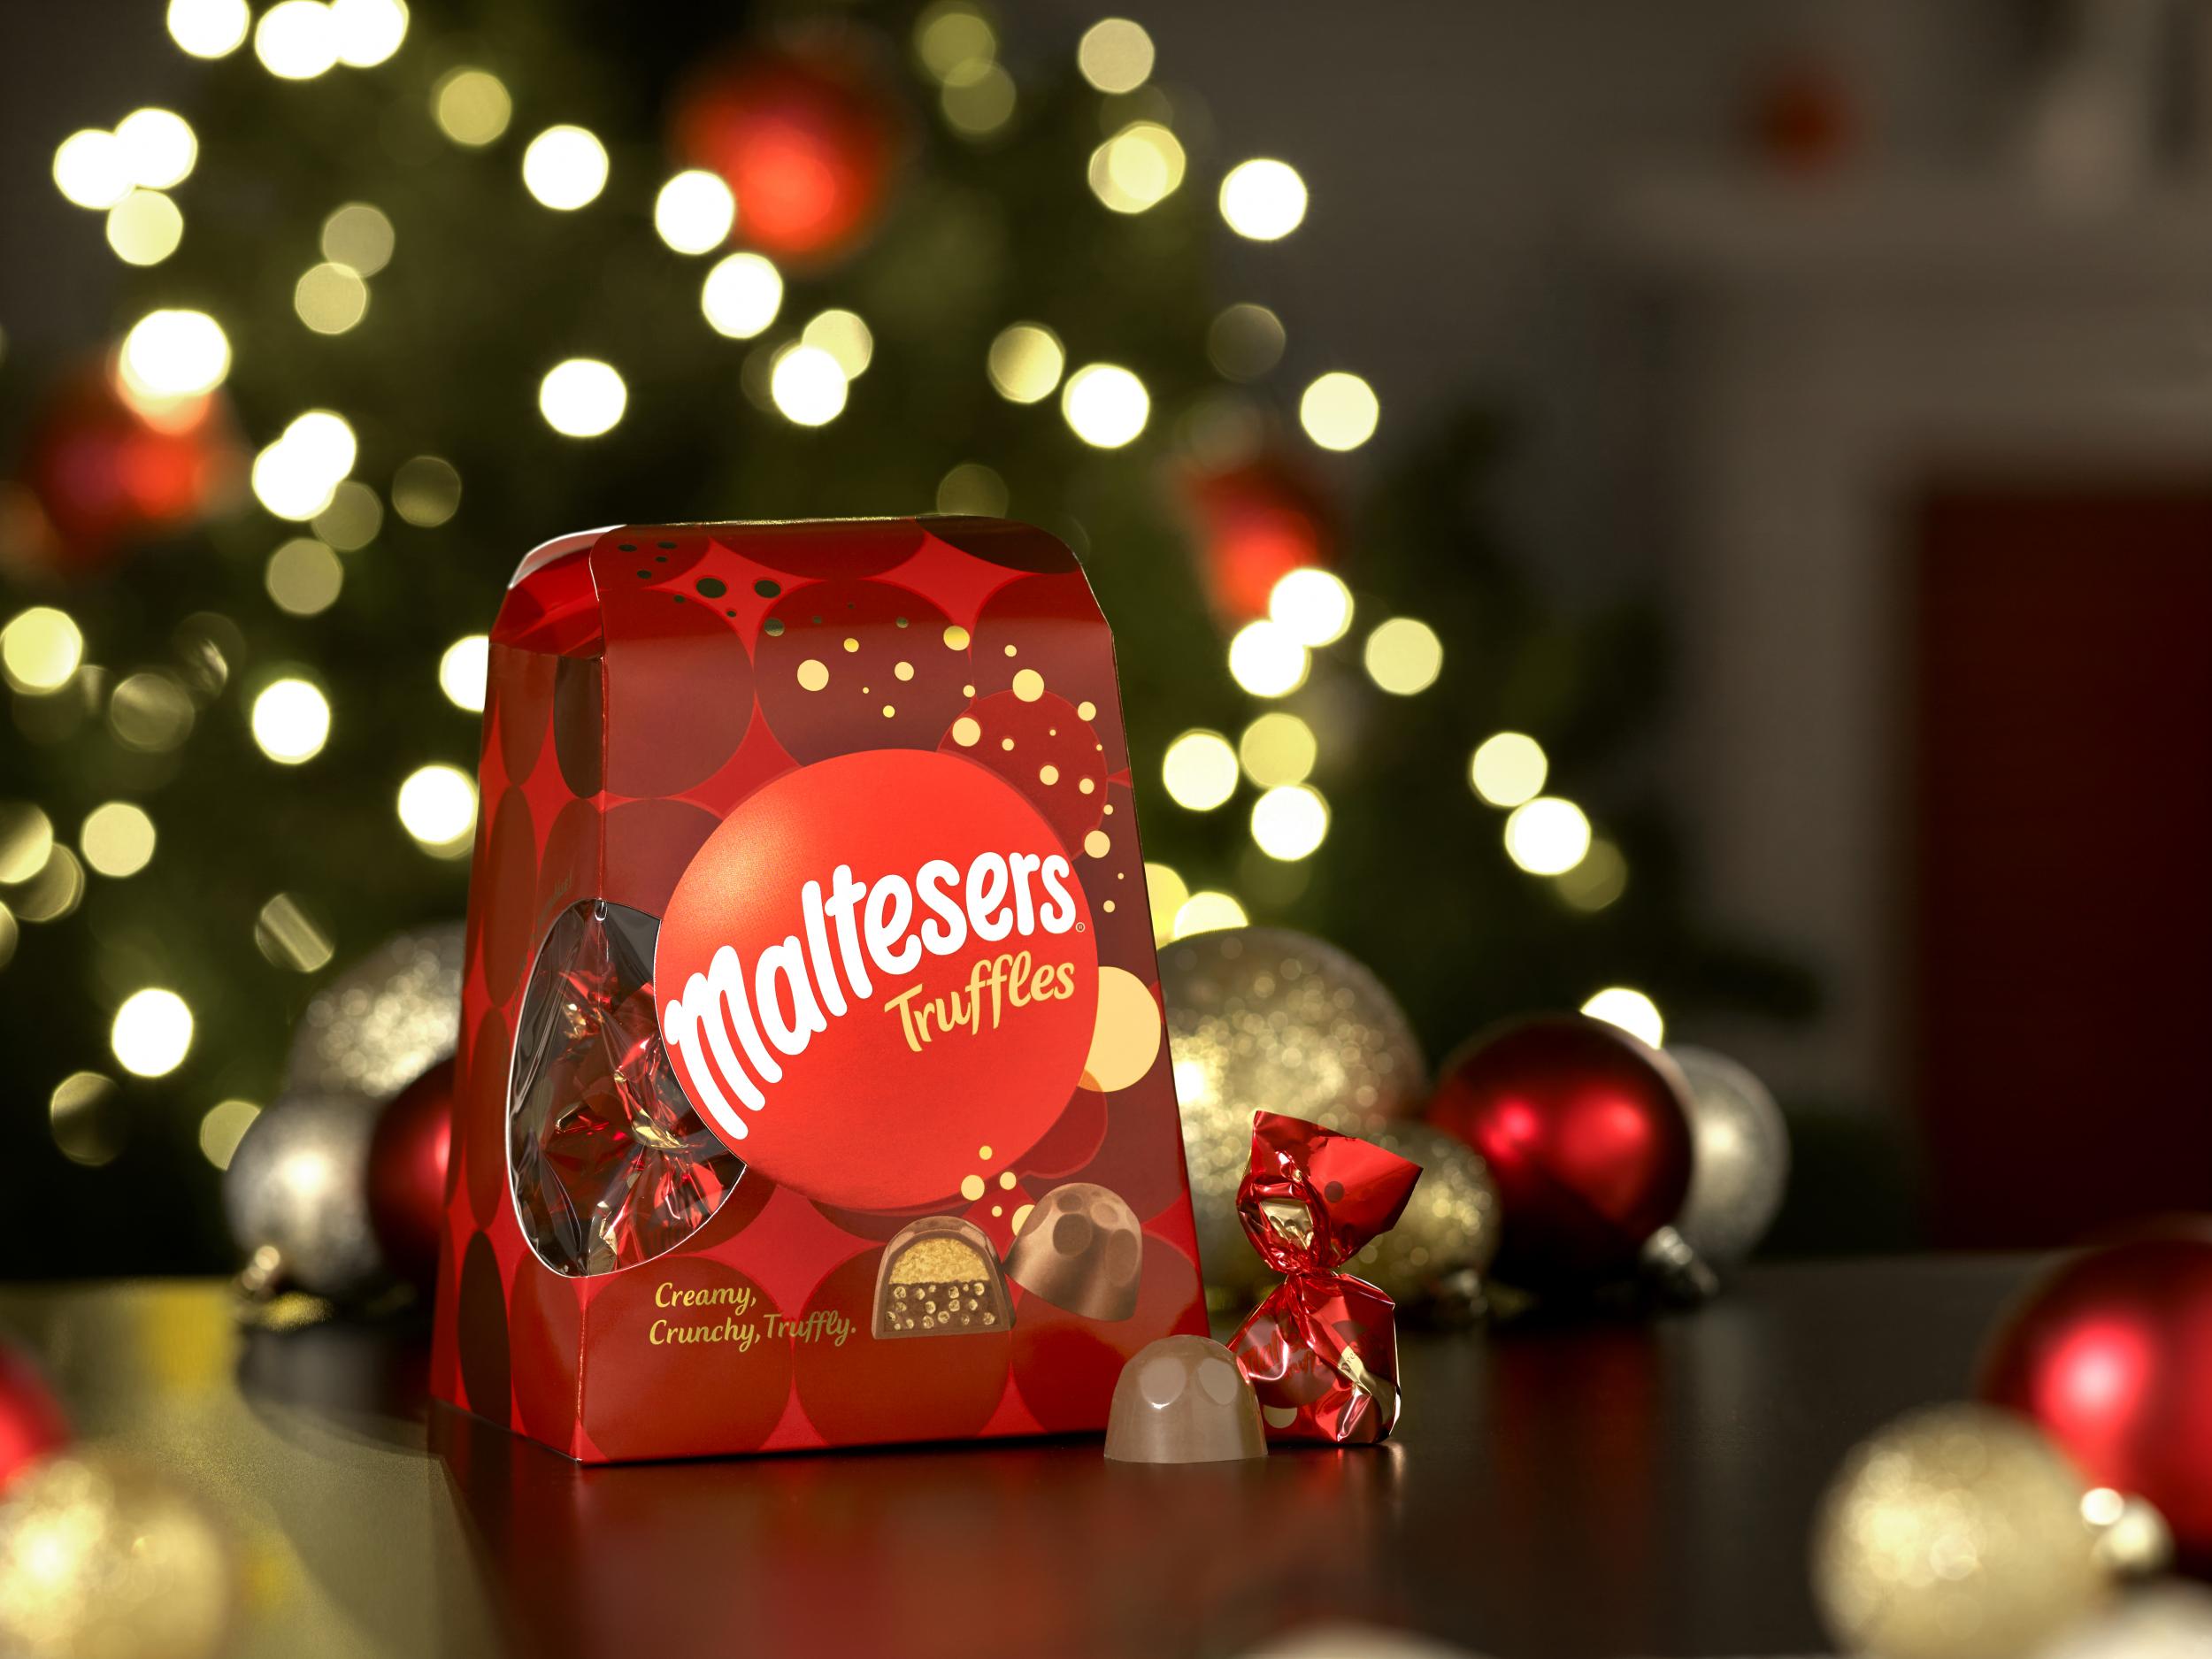 In addition to Maltesers Buttons, Maltesers Truffles will also be launched mid-July